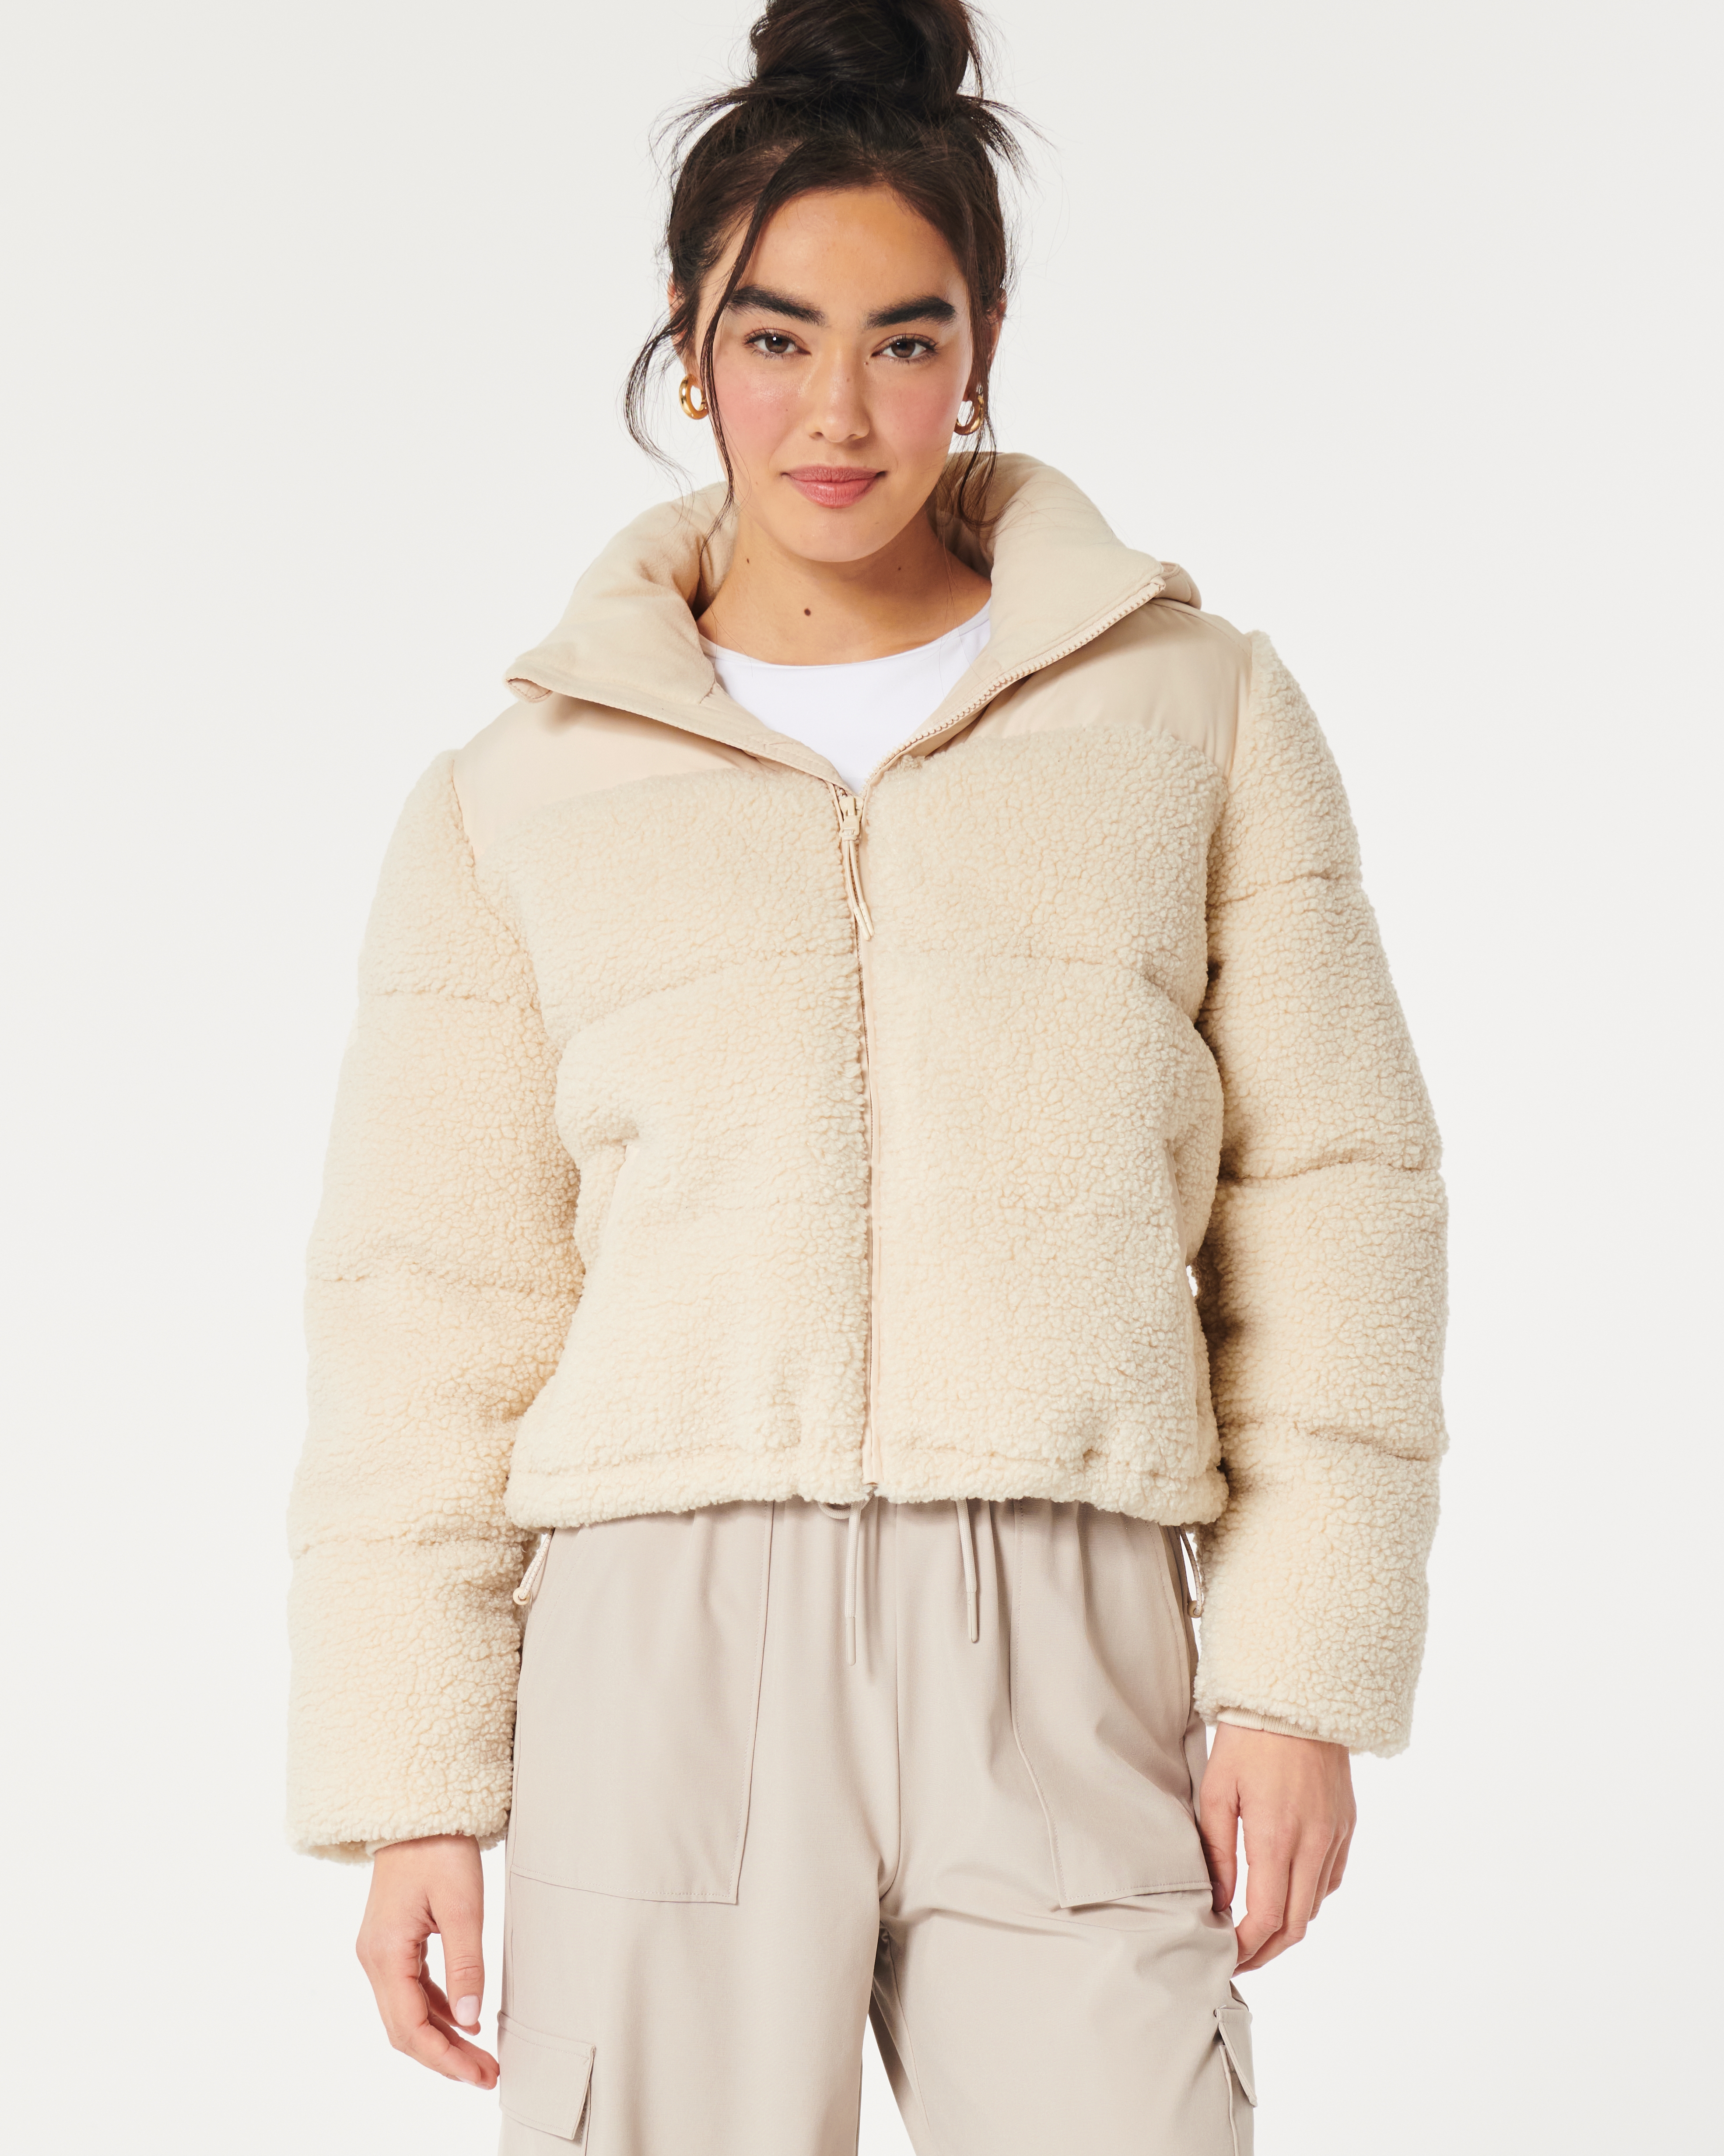 Hollister, Tops, Hollister Gilly Hicks Blush Sherpa Cropped Hoodie